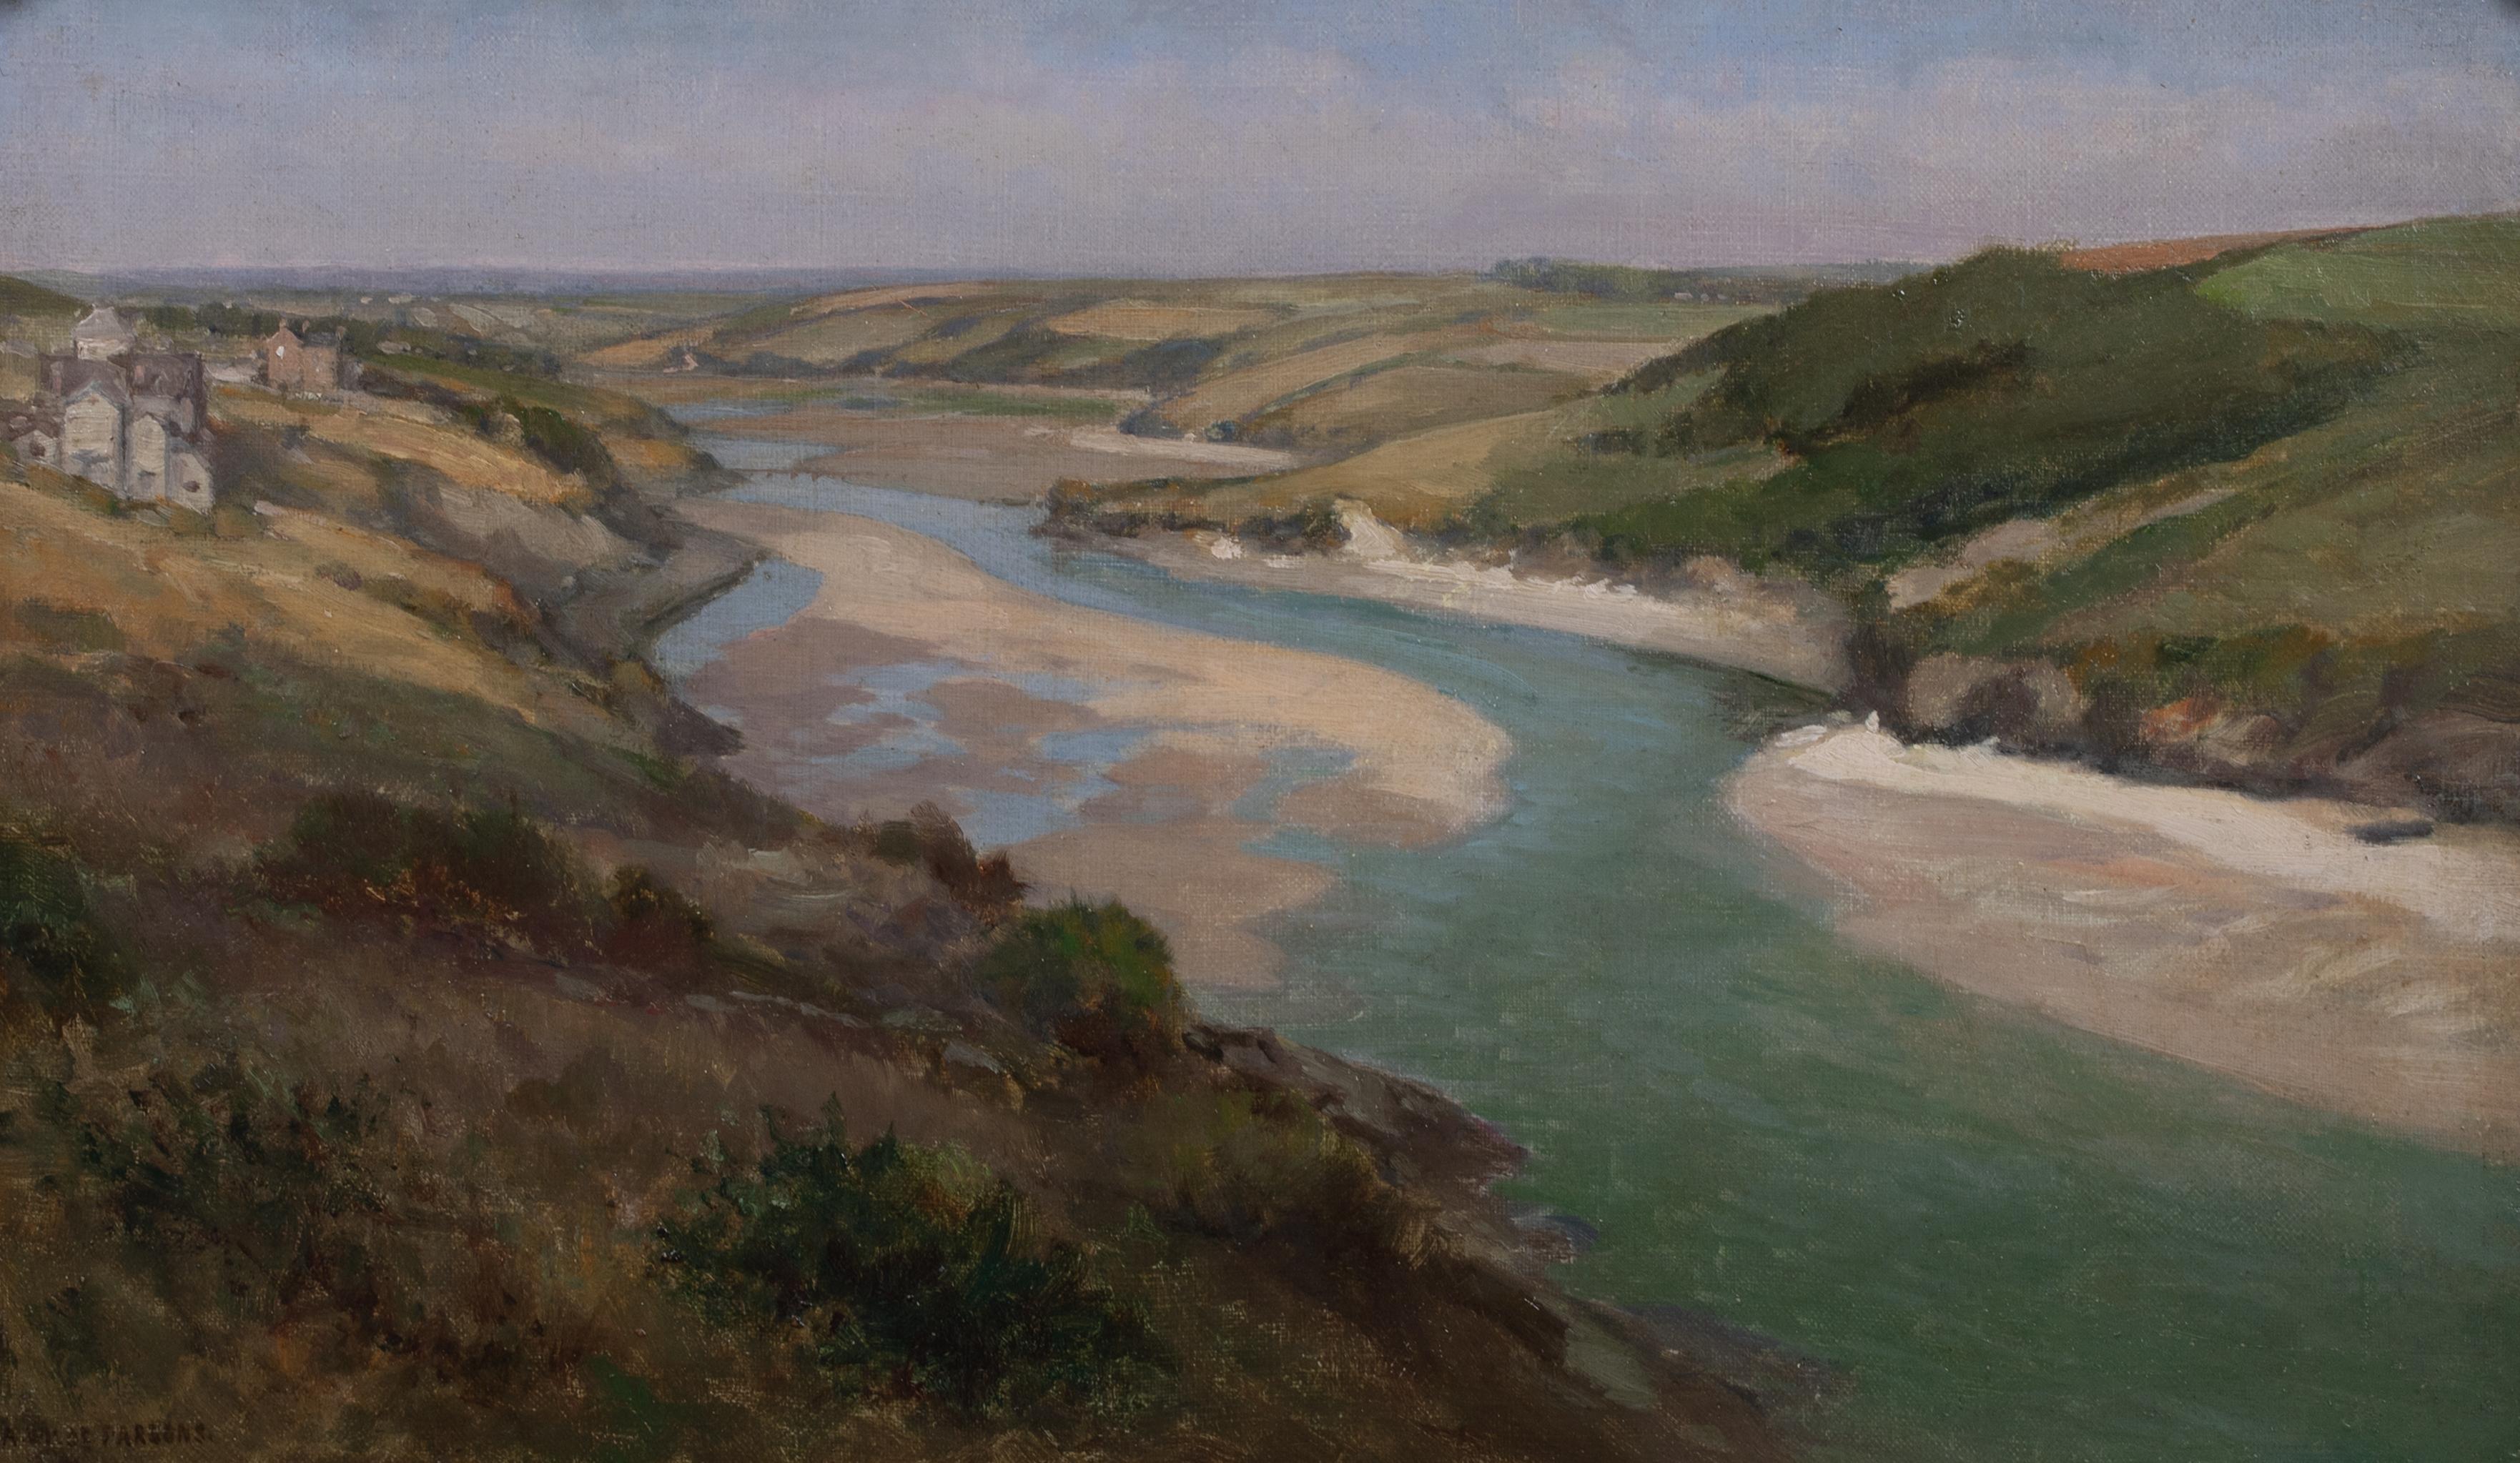 The Gannel Estuary Crantock, circa 1900

by Arthur Wilde PARSONS (1854-1931) 

Circa 1900 view of The Gannel Estuary Crantock, cornwall, oil on canvas by Arthur Wilde PARSONS. Excellent quality and condition example of the artists work are rare